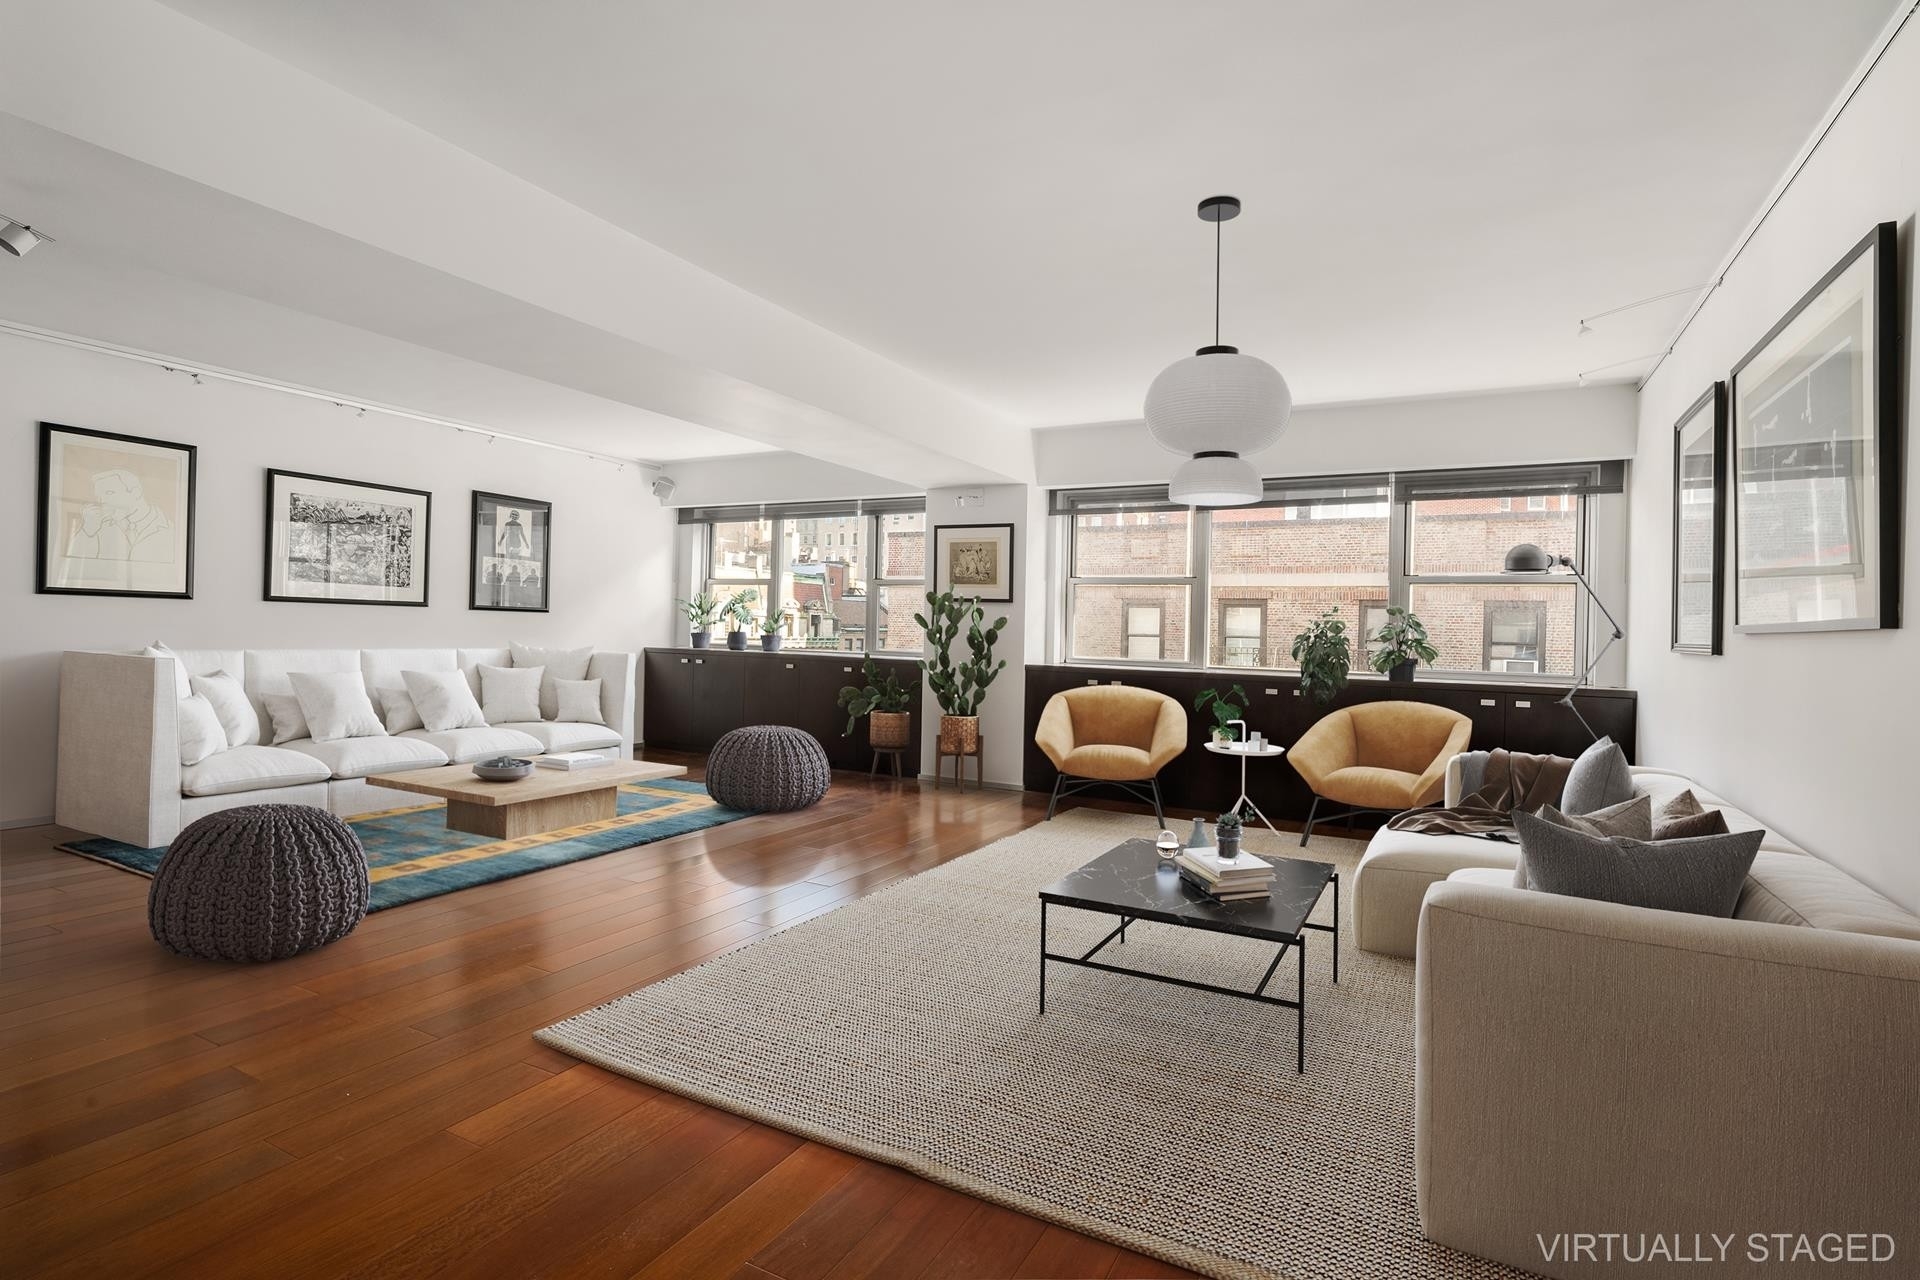 Condominium for Sale at The Charles House, 40 E 78TH ST, 7H Upper East Side, New York, New York 10075